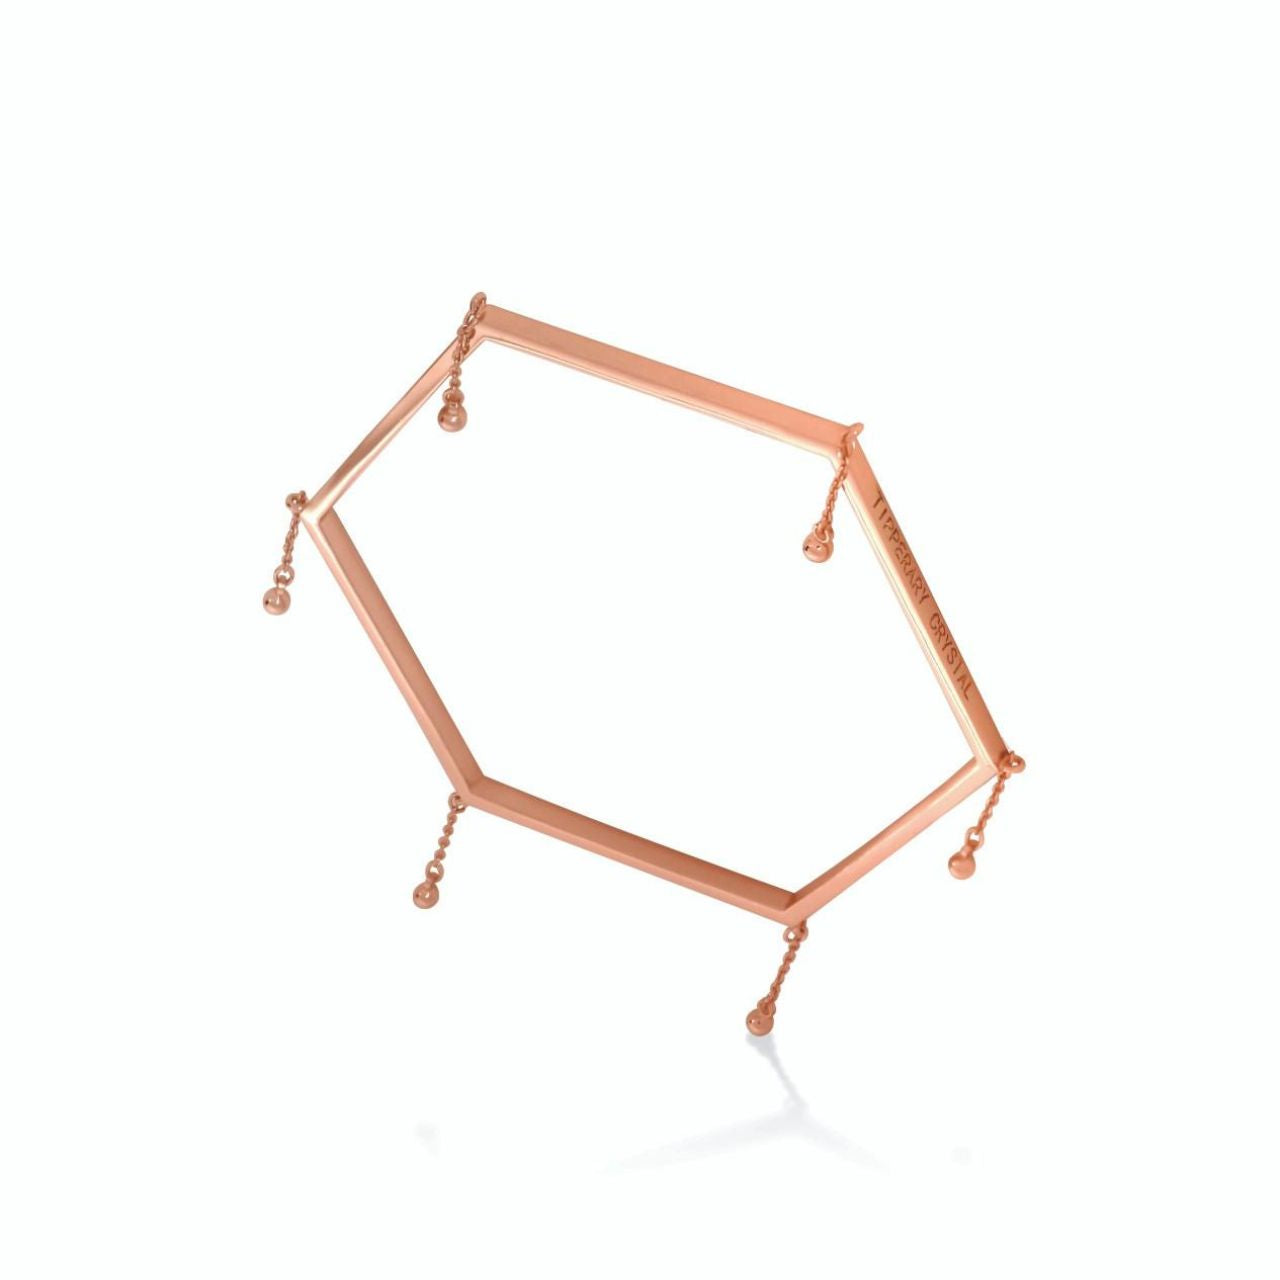 Tipperary Crystal Honeycomb Bangle Rose Gold  Fashioned in rose gold this eye-catching hexagonal shaped bangle is adorned with shimmering cable chains at each point creating a really beautiful piece. This bangle can be worn alone or stacked with other arm pieces from this collection.